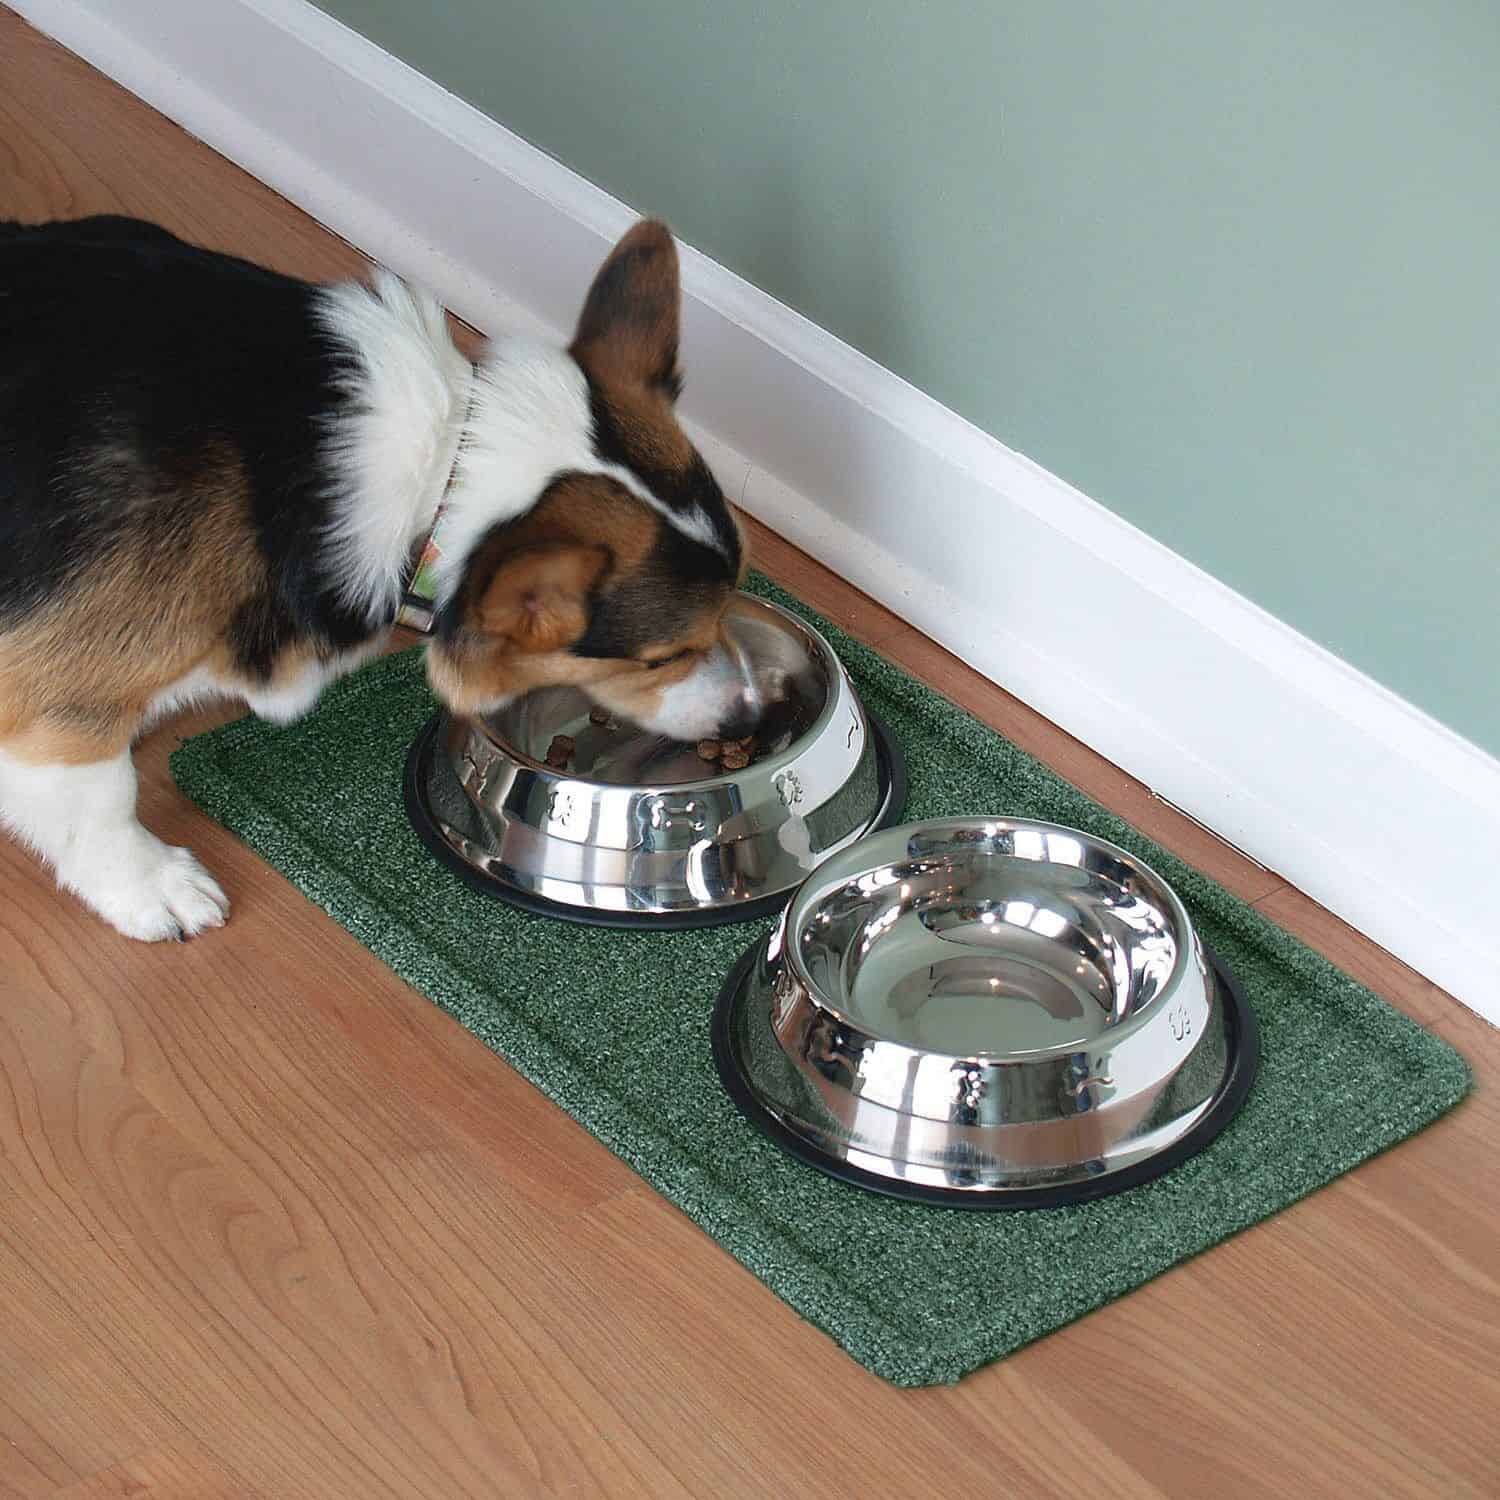 A dog eating from a stainless steel bowl on a green mat.